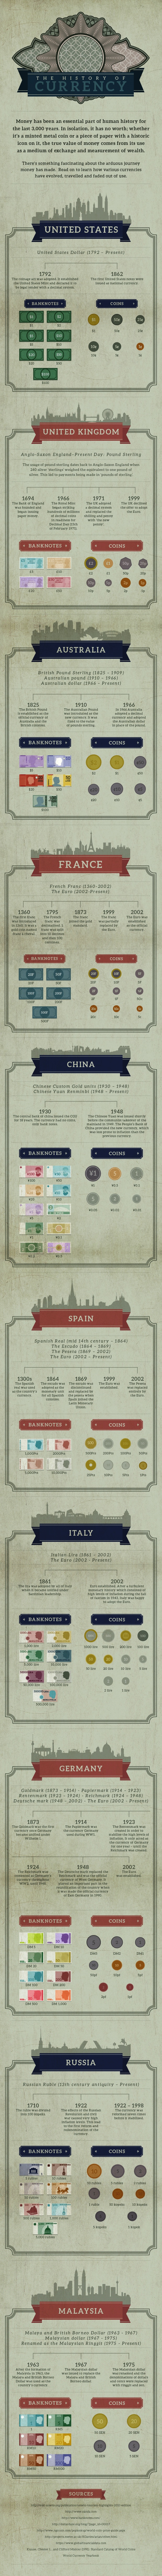 The History of Currency in 10 Different Countries